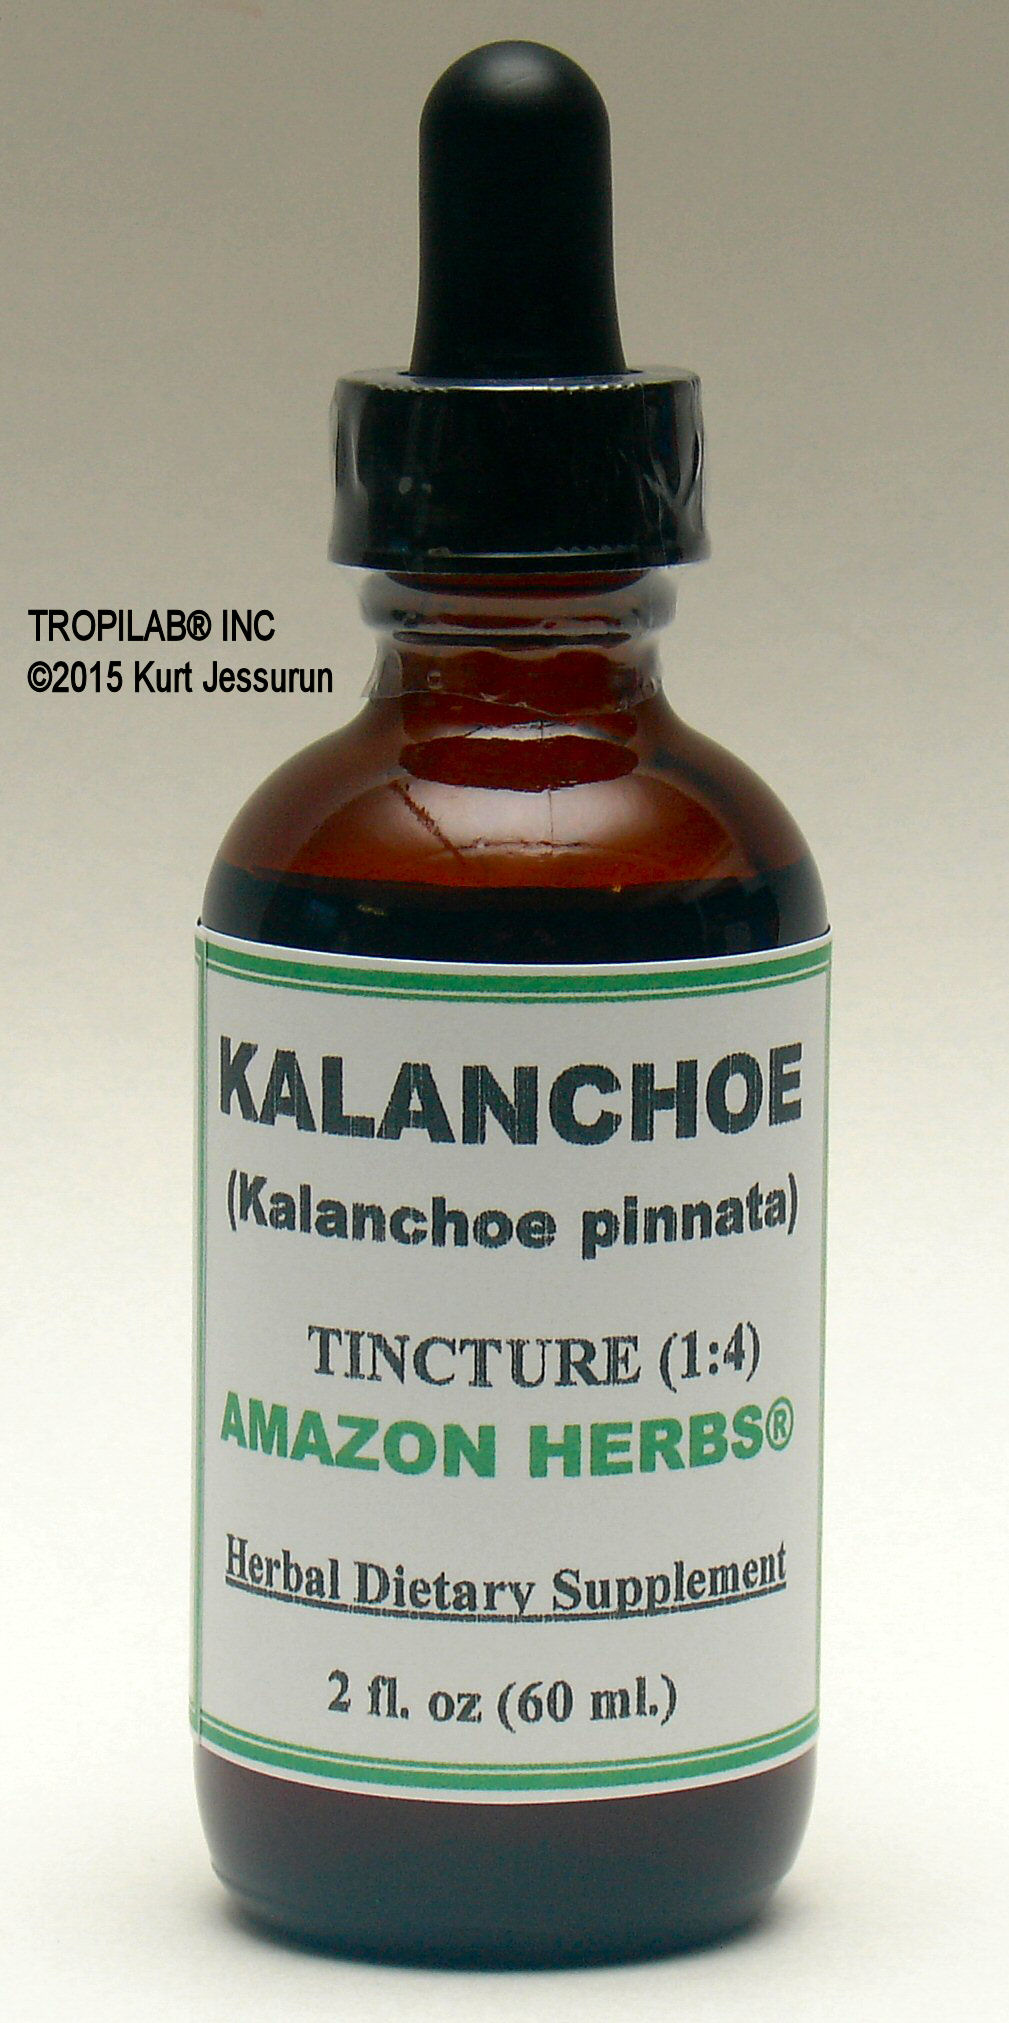 Kalanchoe pinnata, Air plant tincture only for US$18.65. Used against headaches, backaches and rheumatism. Against upper
 respiratory tract infections, URTI's, works against viral, bacterial and fungal infections. Against leishmaniasis; hepatoprotective.
 The tincture works on varicose veins, stimulates the blood circulation. Can also be topical applied to wounds, boils, and insect bites.